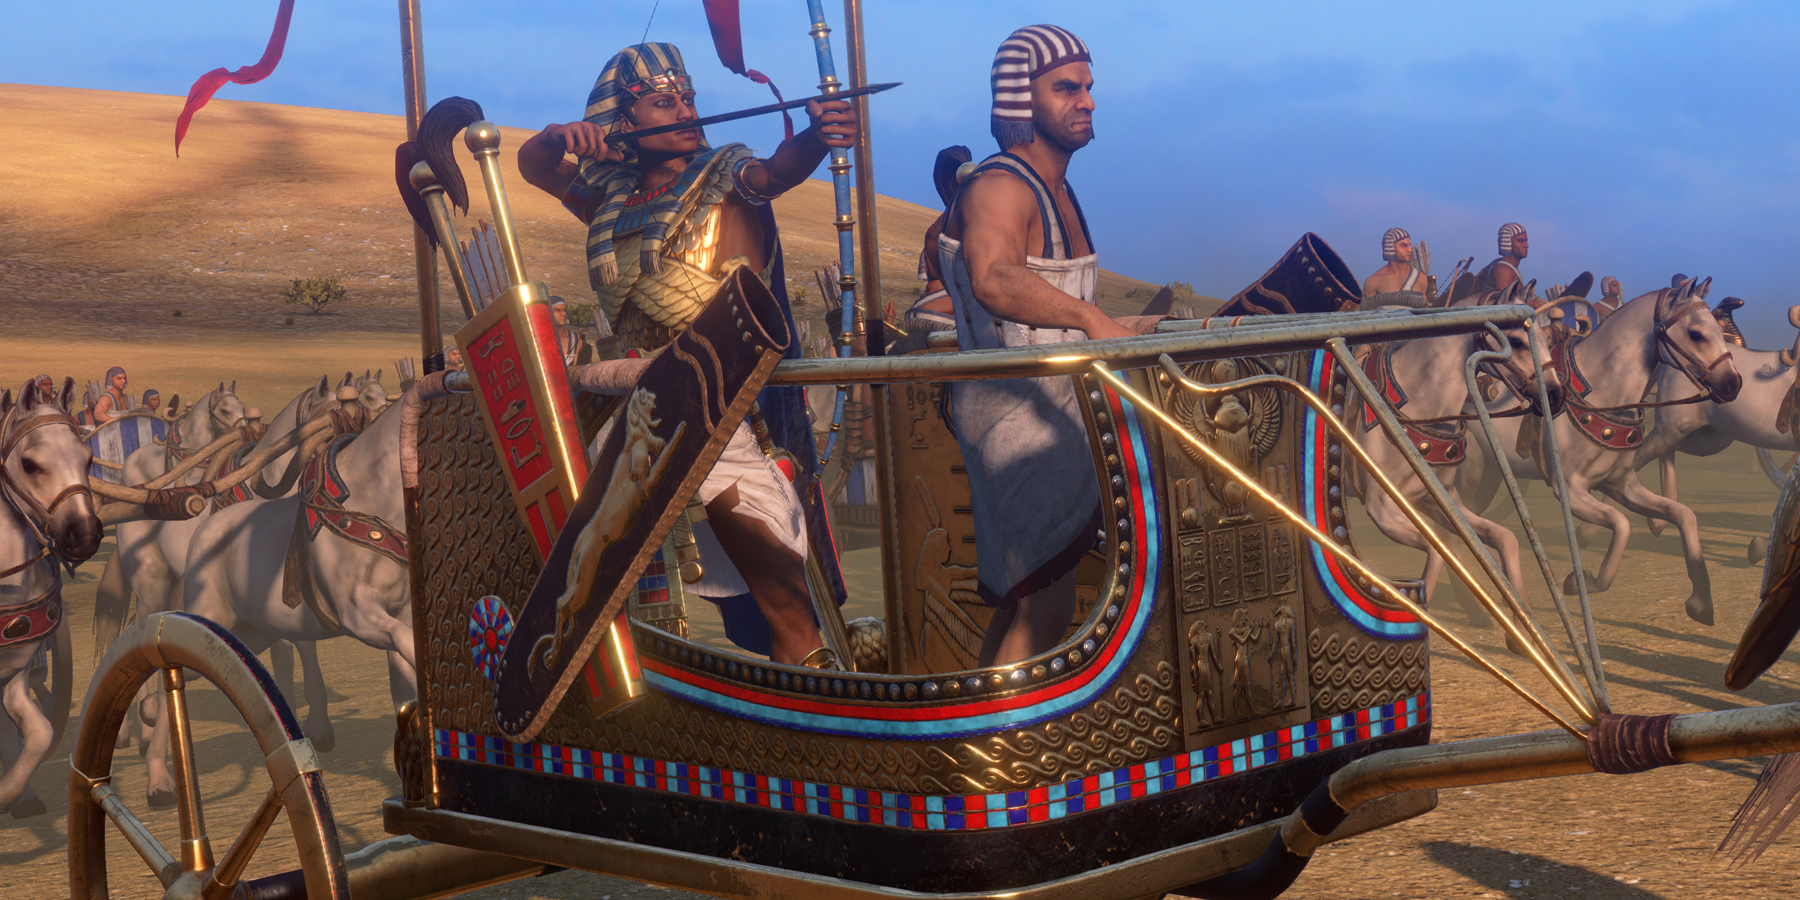 Tamatem Games  'Total War: Pharaoh' is a Timeless Classic In the